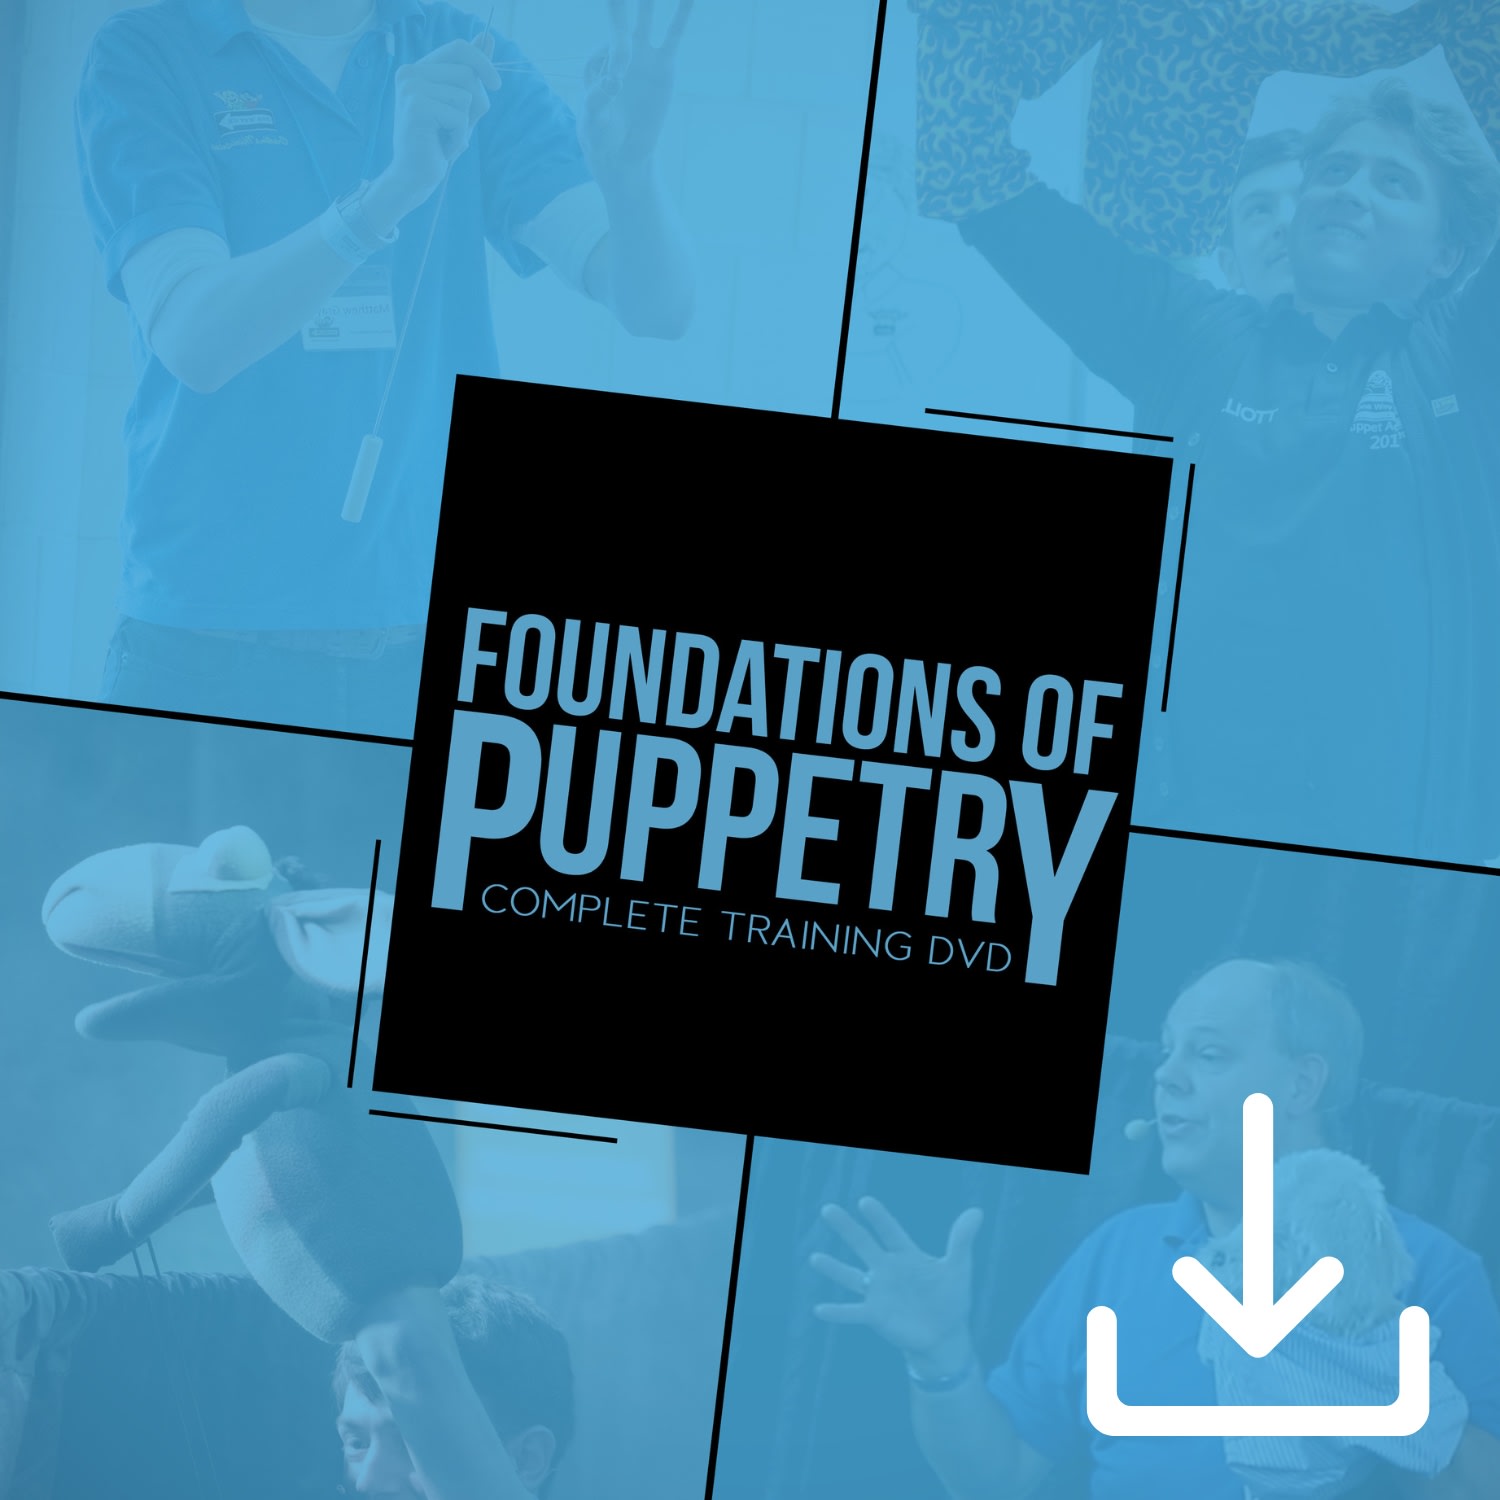 Foundations of Puppetry - Complete Training